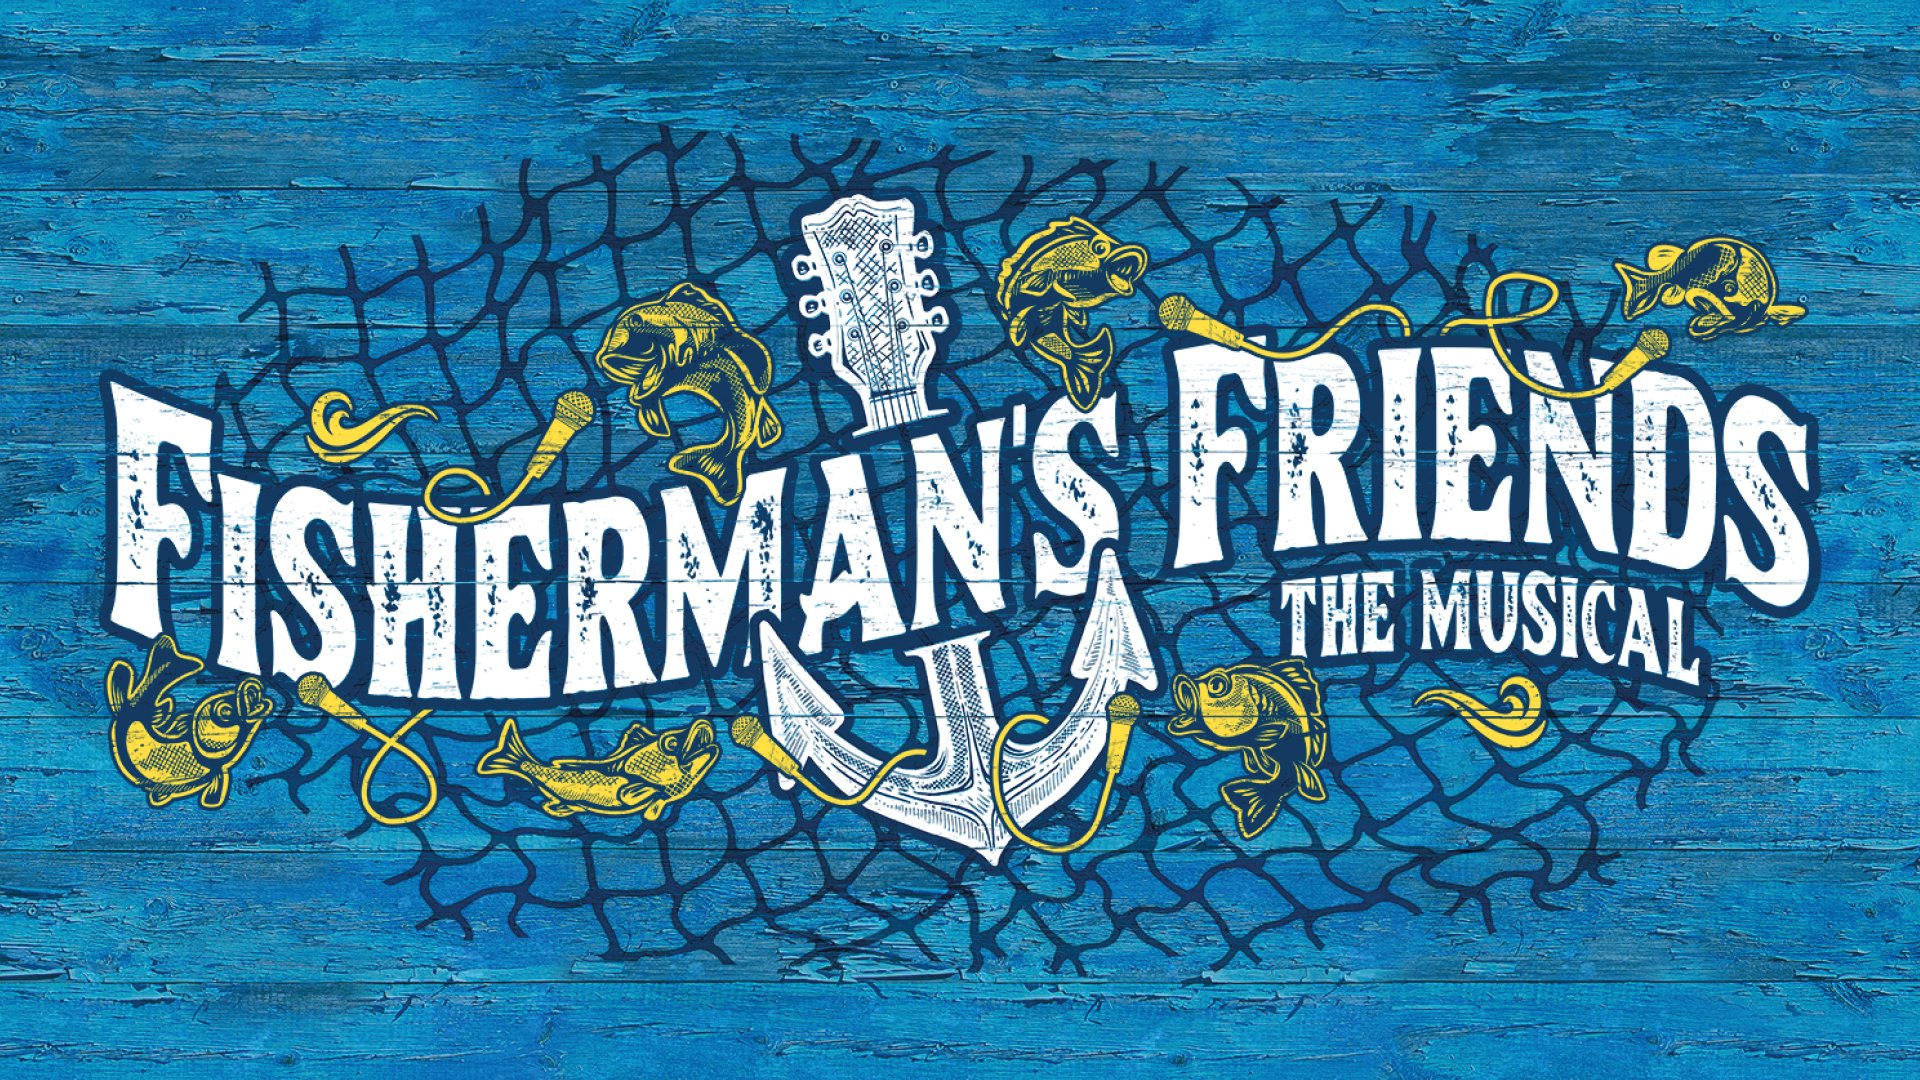 Fisherman’s Friends – The Musical